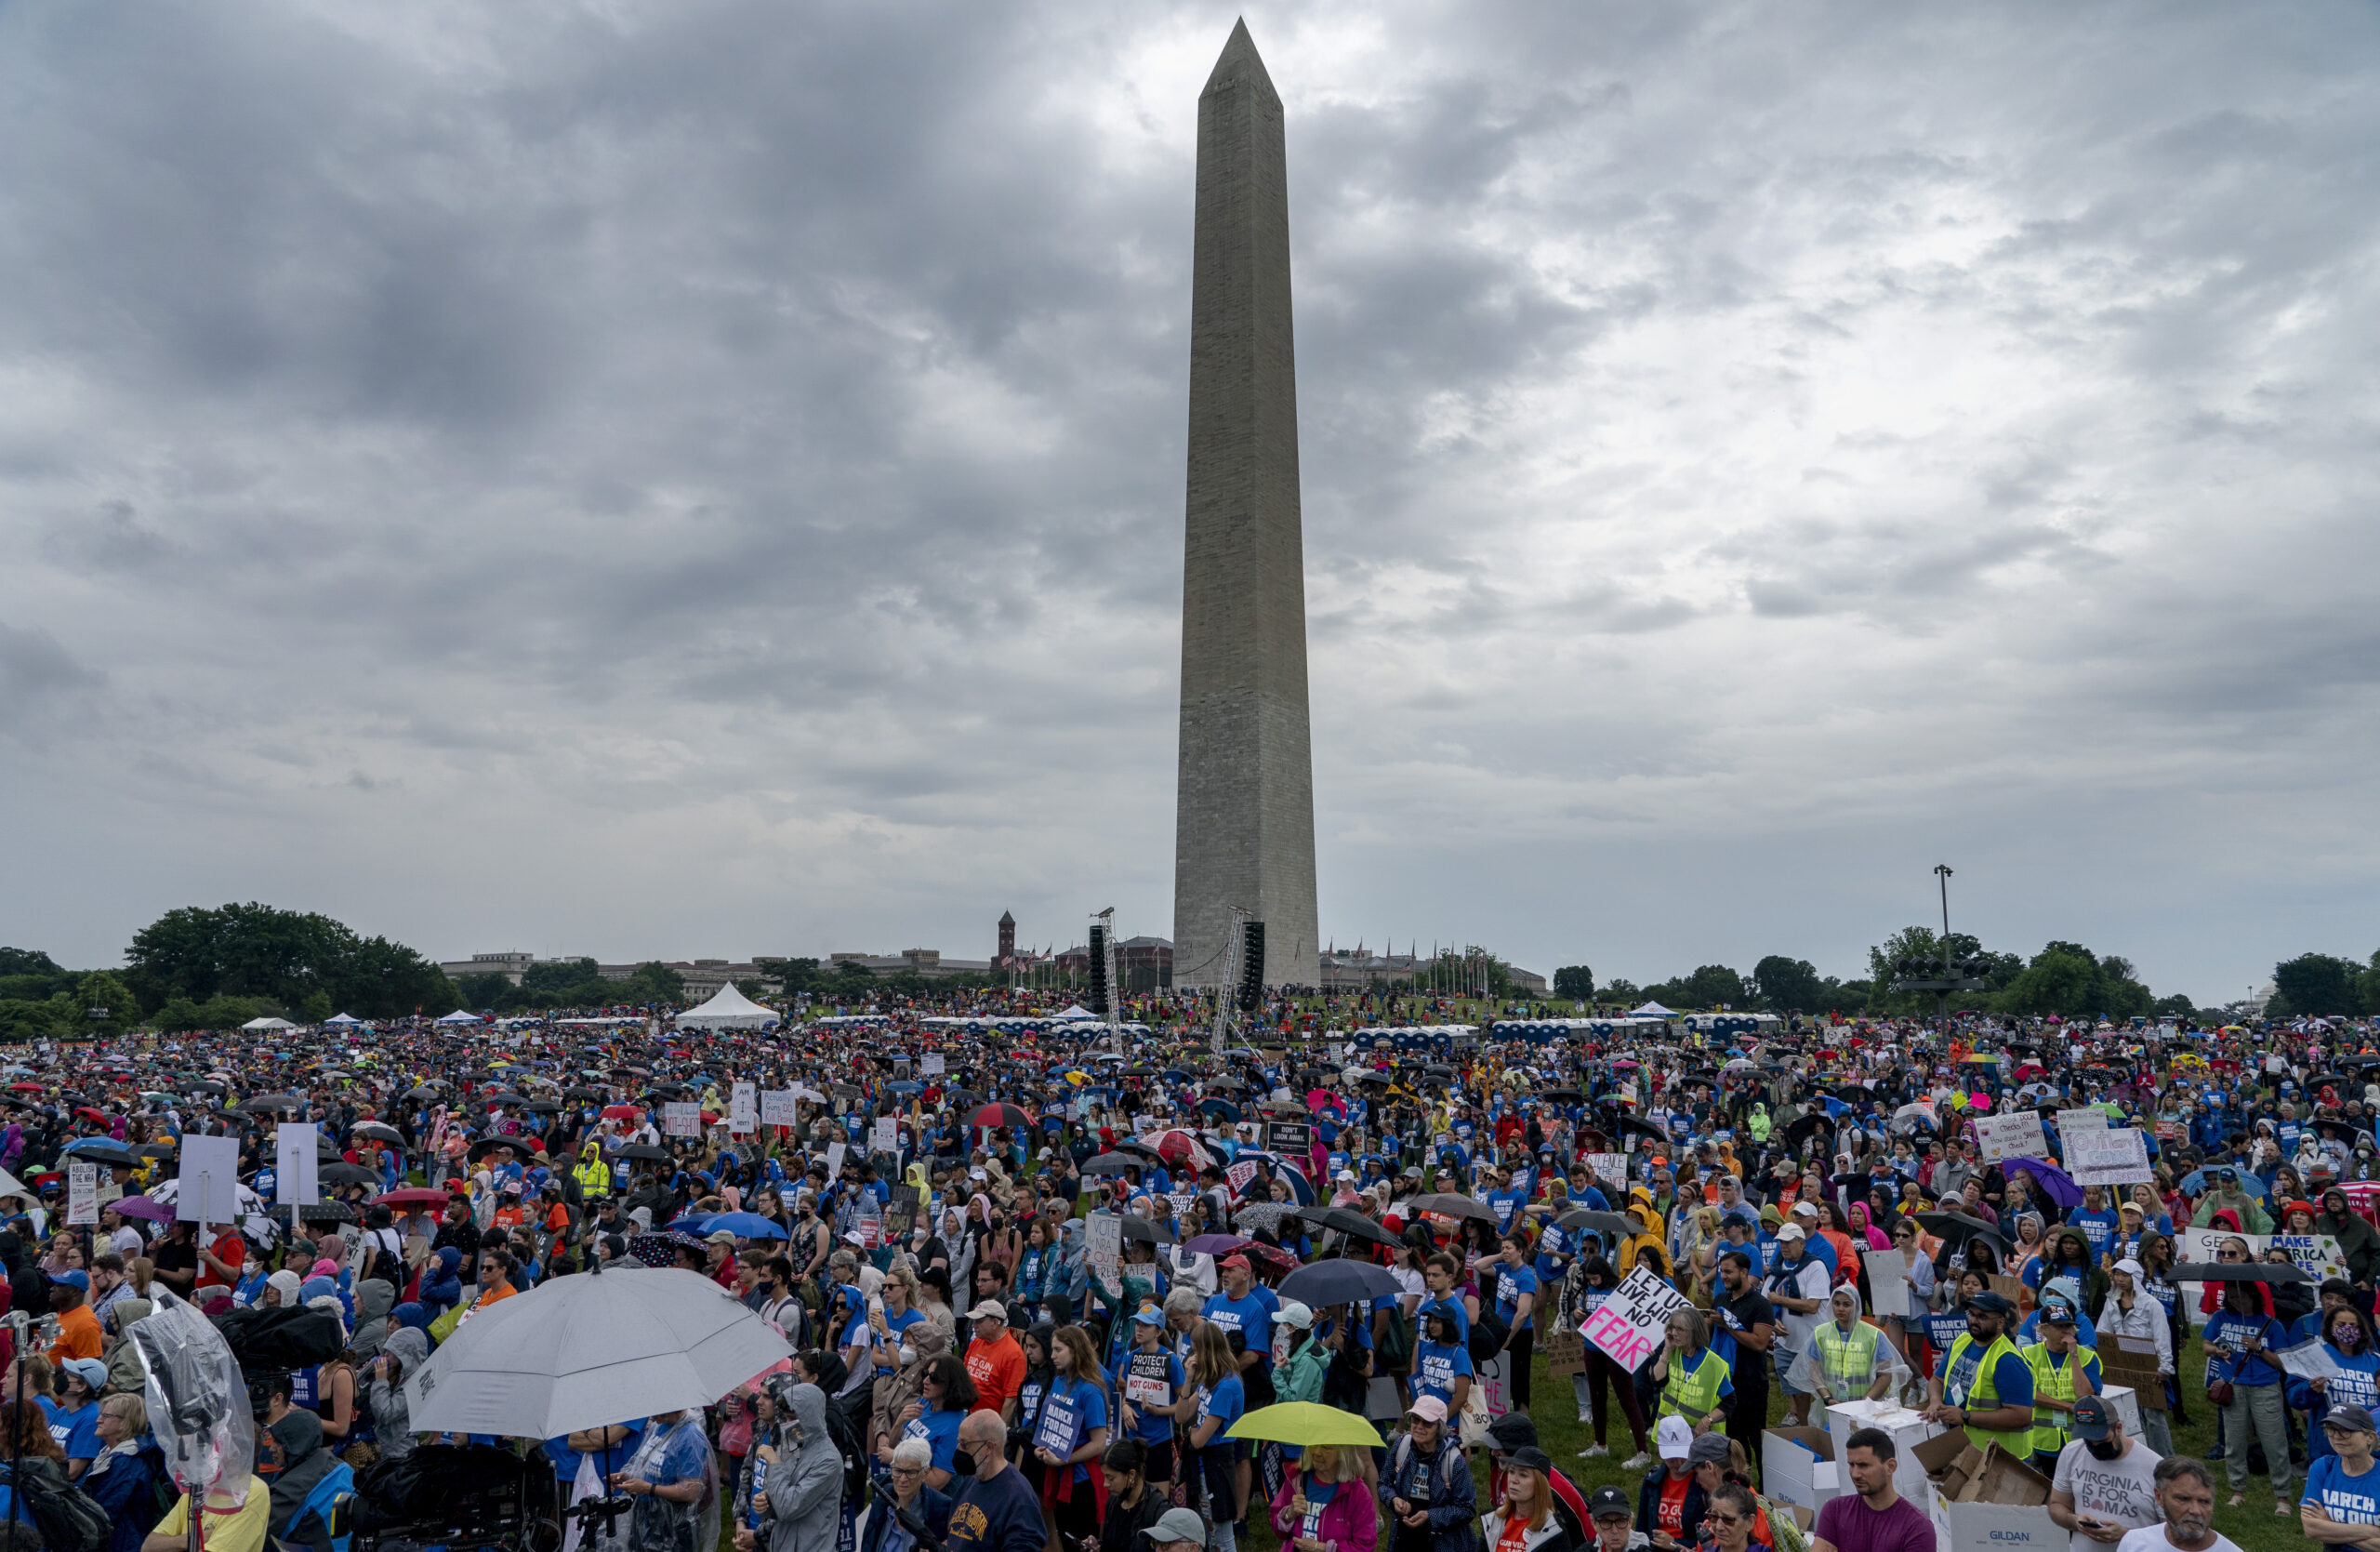 People participate in the second March for Our Lives rally in support of gun control in front of the Washington Monument, Saturday, June 11, 2022, in Washington. The rally is a successor to the 2018 march organized by student protestors after the mass shooting at a high school in Parkland, Fla. (AP Photo/Gemunu Amarasinghe)